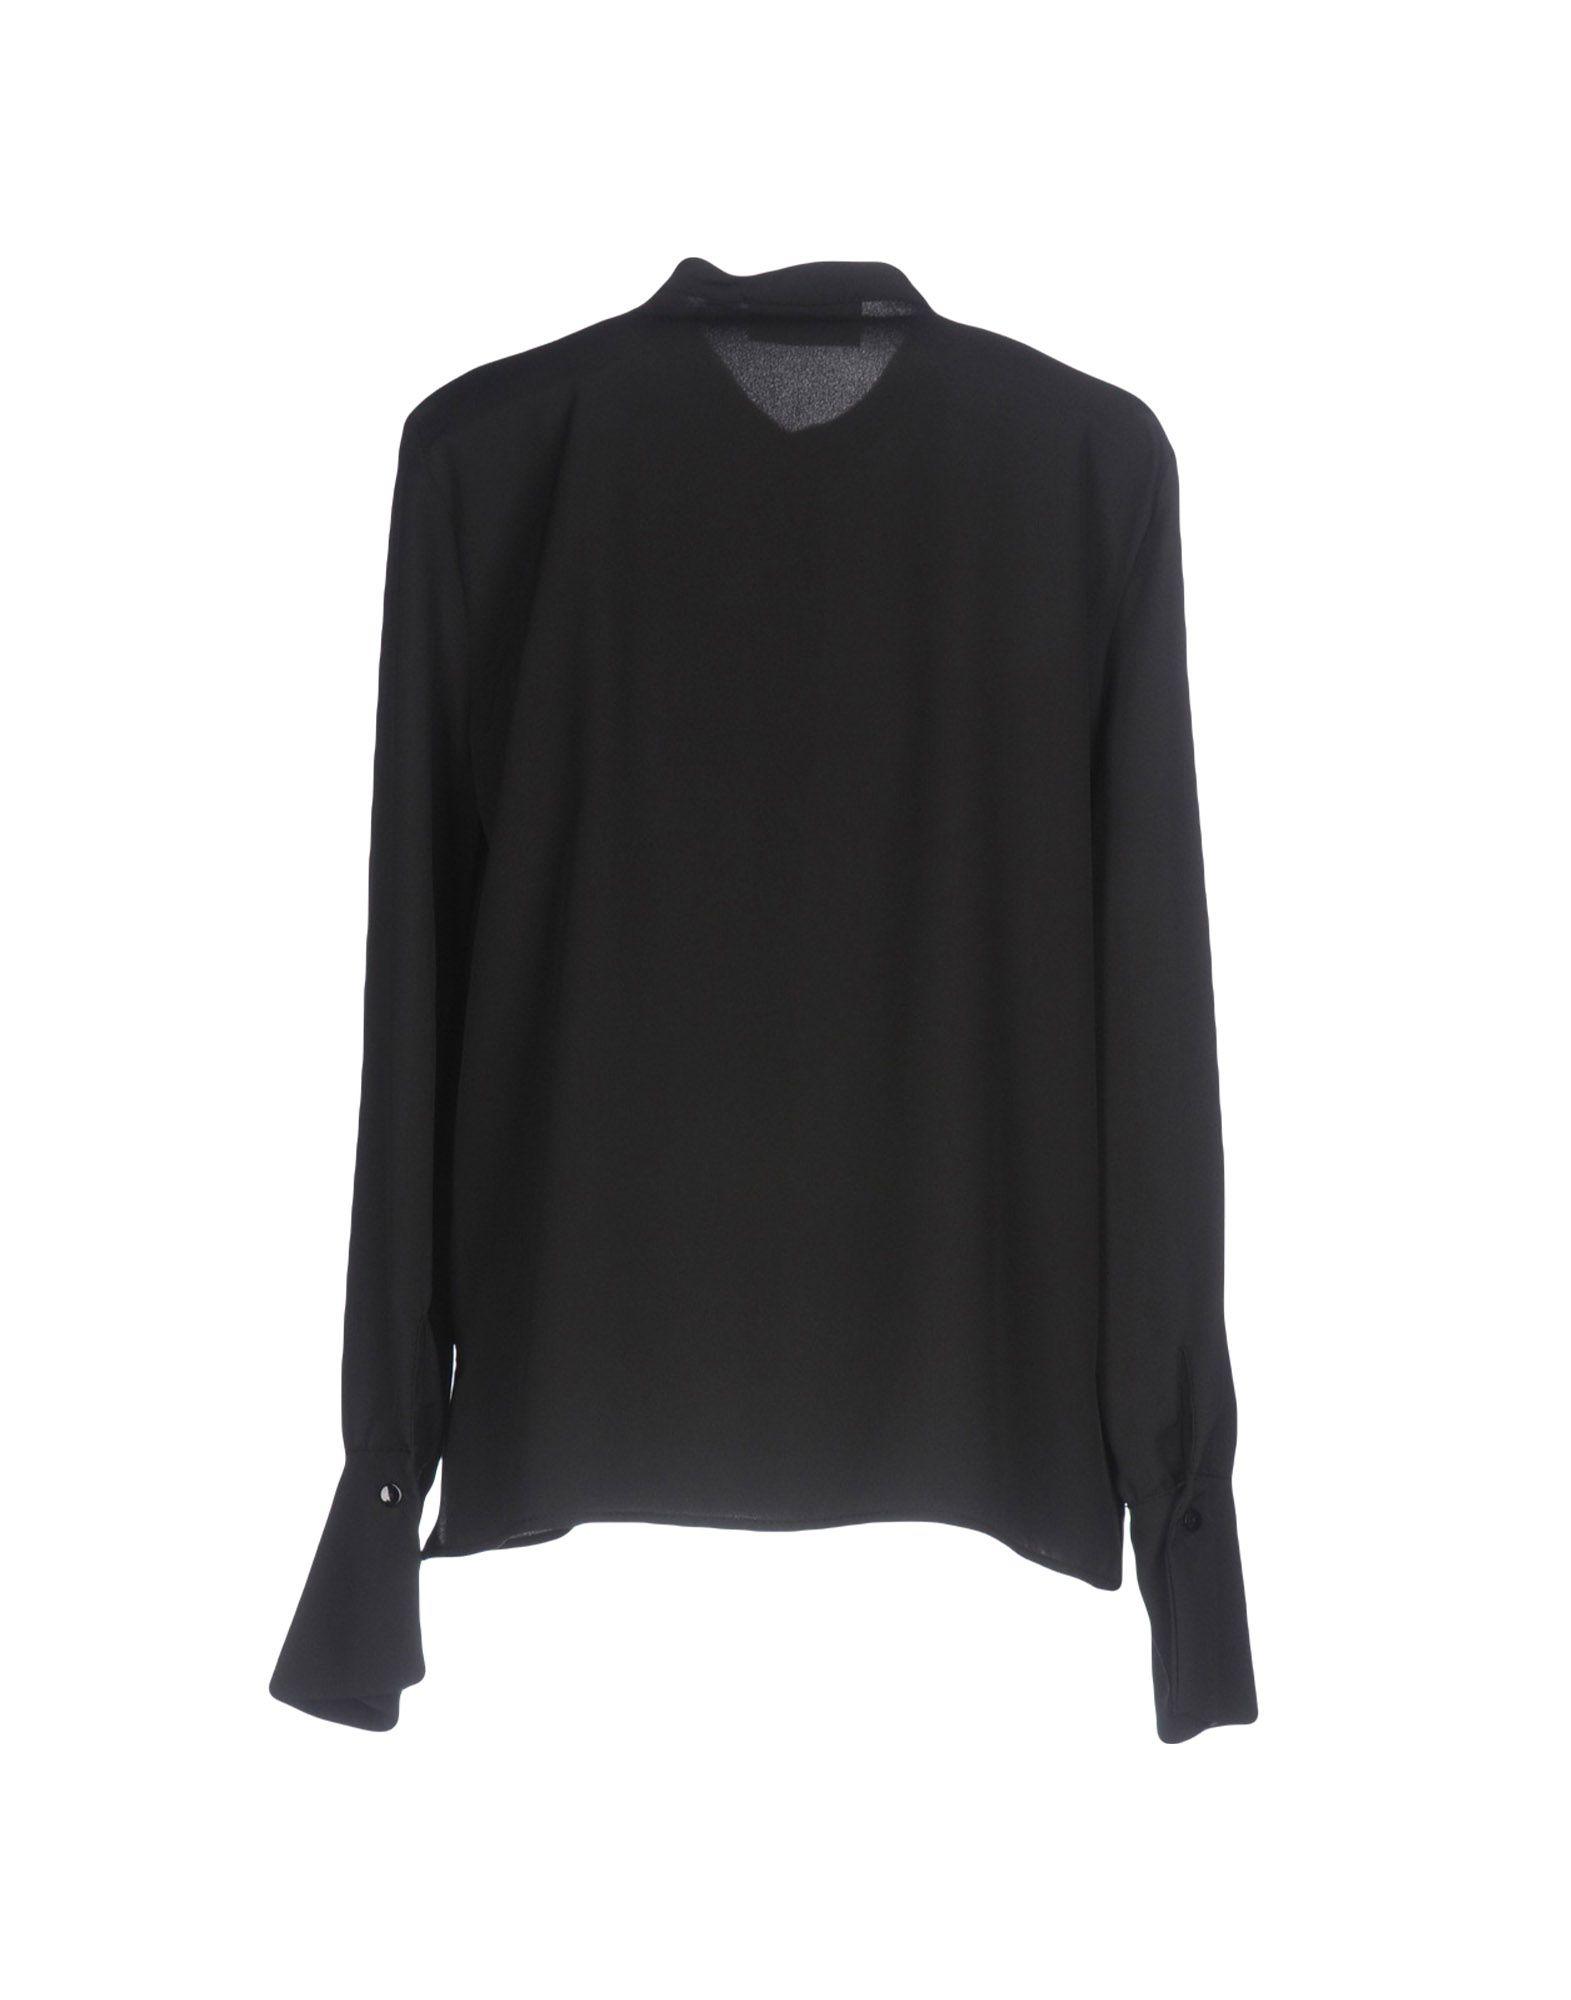 ViCOLO Synthetic Shirt in Black - Lyst